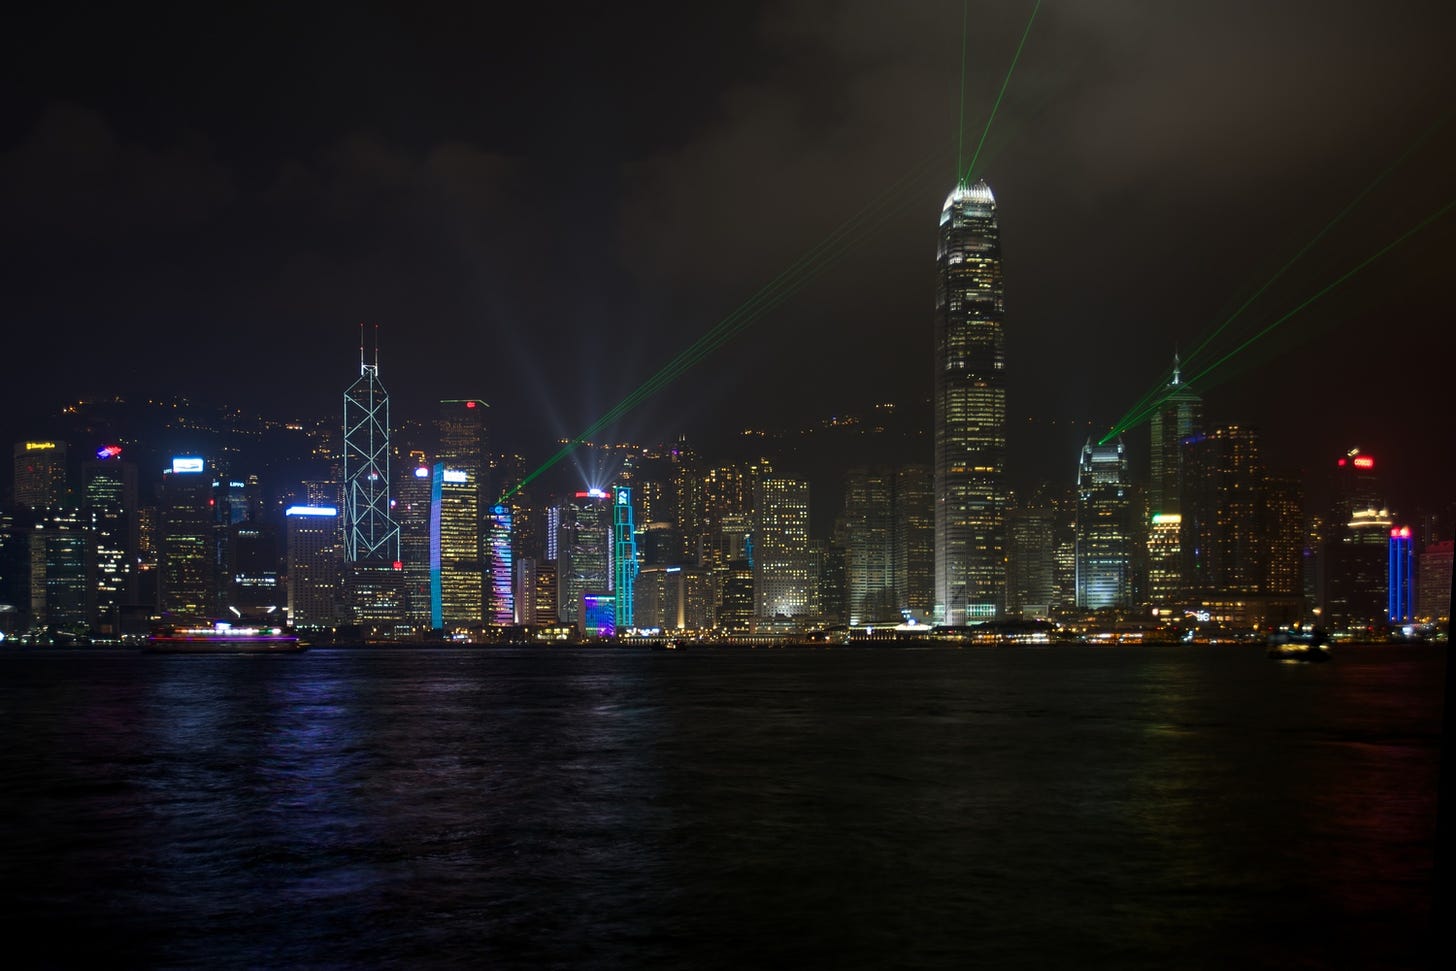 Hong Kong Symphony of Lights from Kowloon